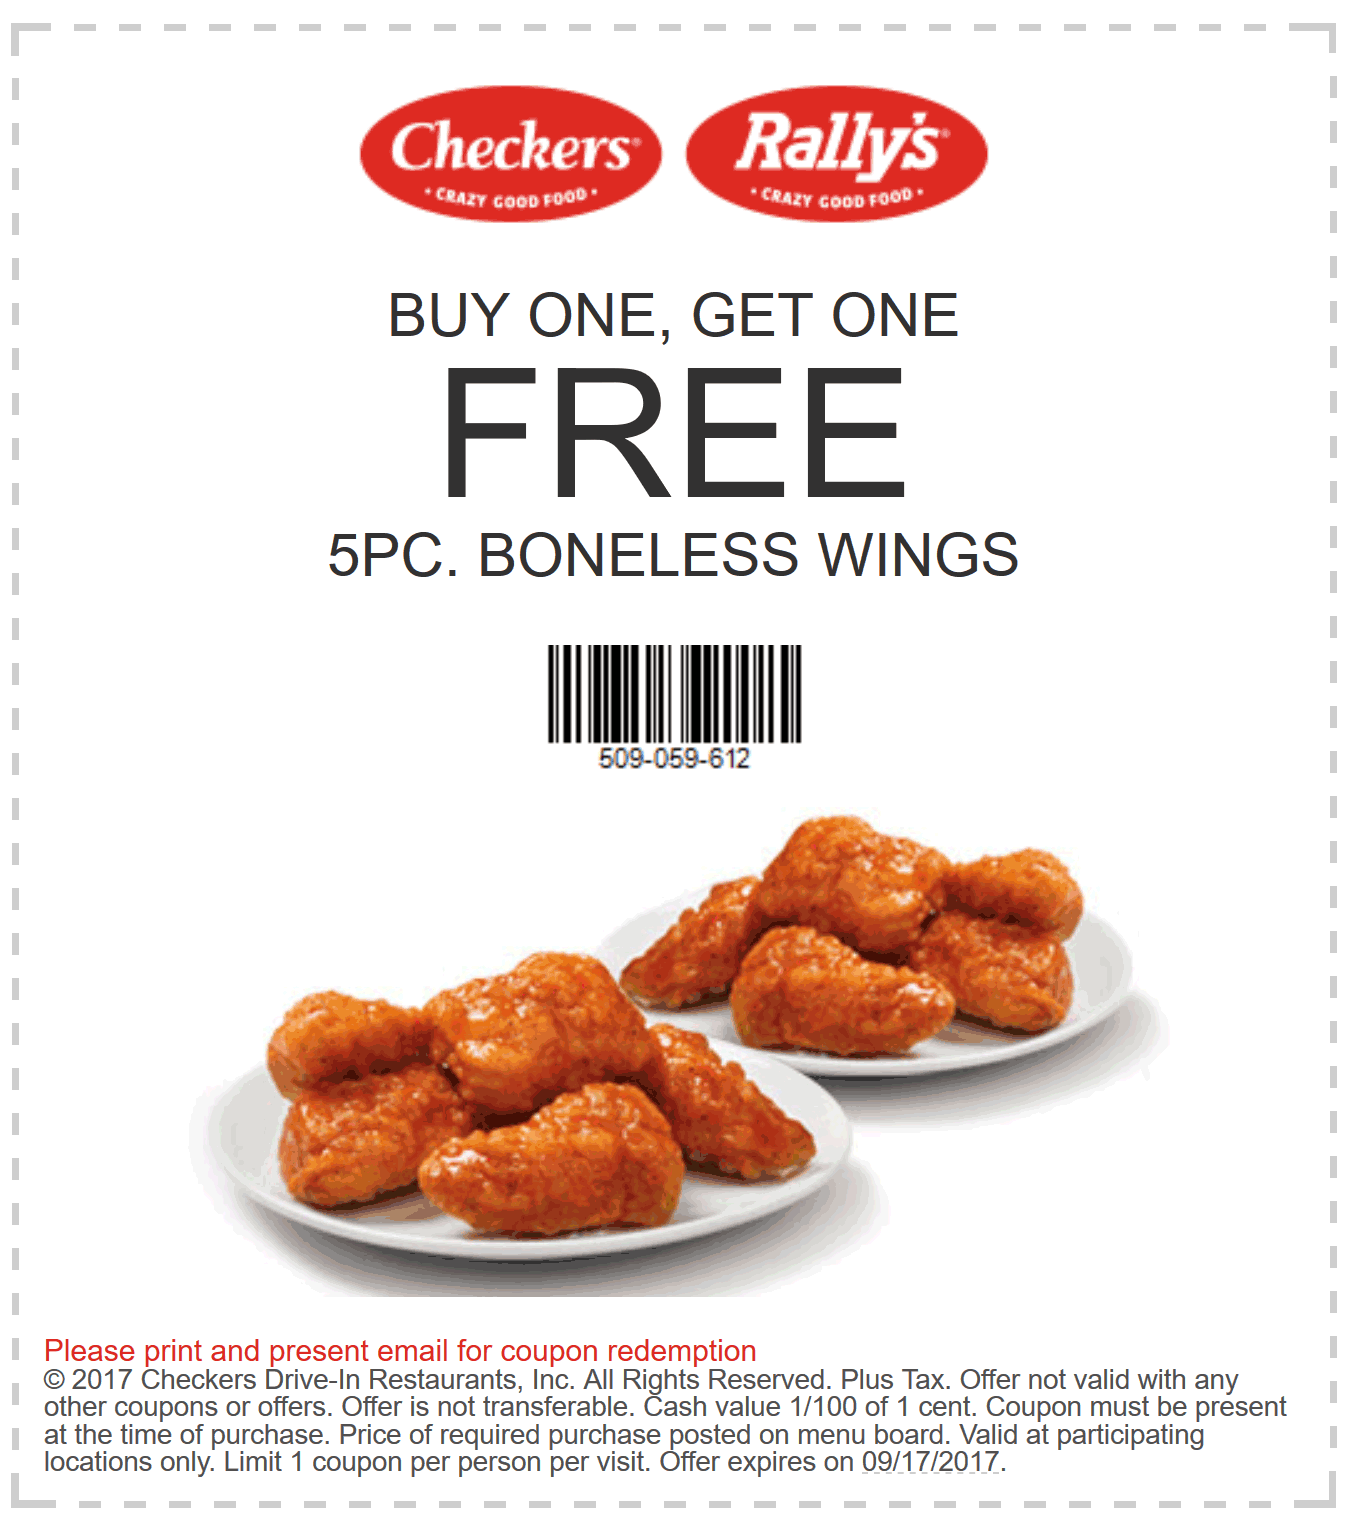 Checkers Coupon April 2024 Second 5pc boneless wings free at Rallys & Checkers restaurants